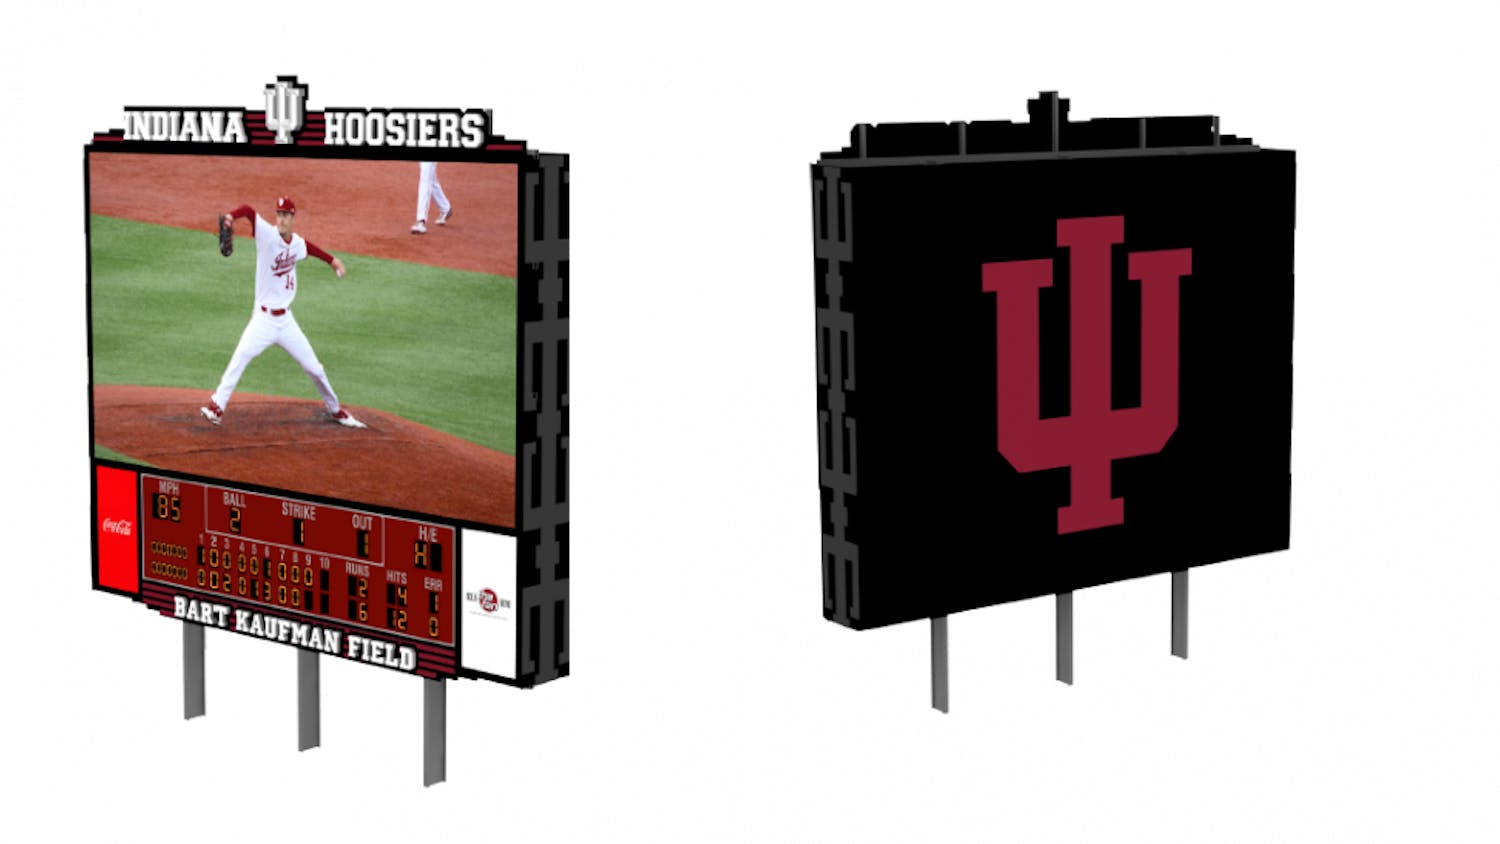 A rendering provided by IU Athletics shows what the new scoreboard for Bart Kaufman Field will look like. The scoreboards should be up and running by March 7.